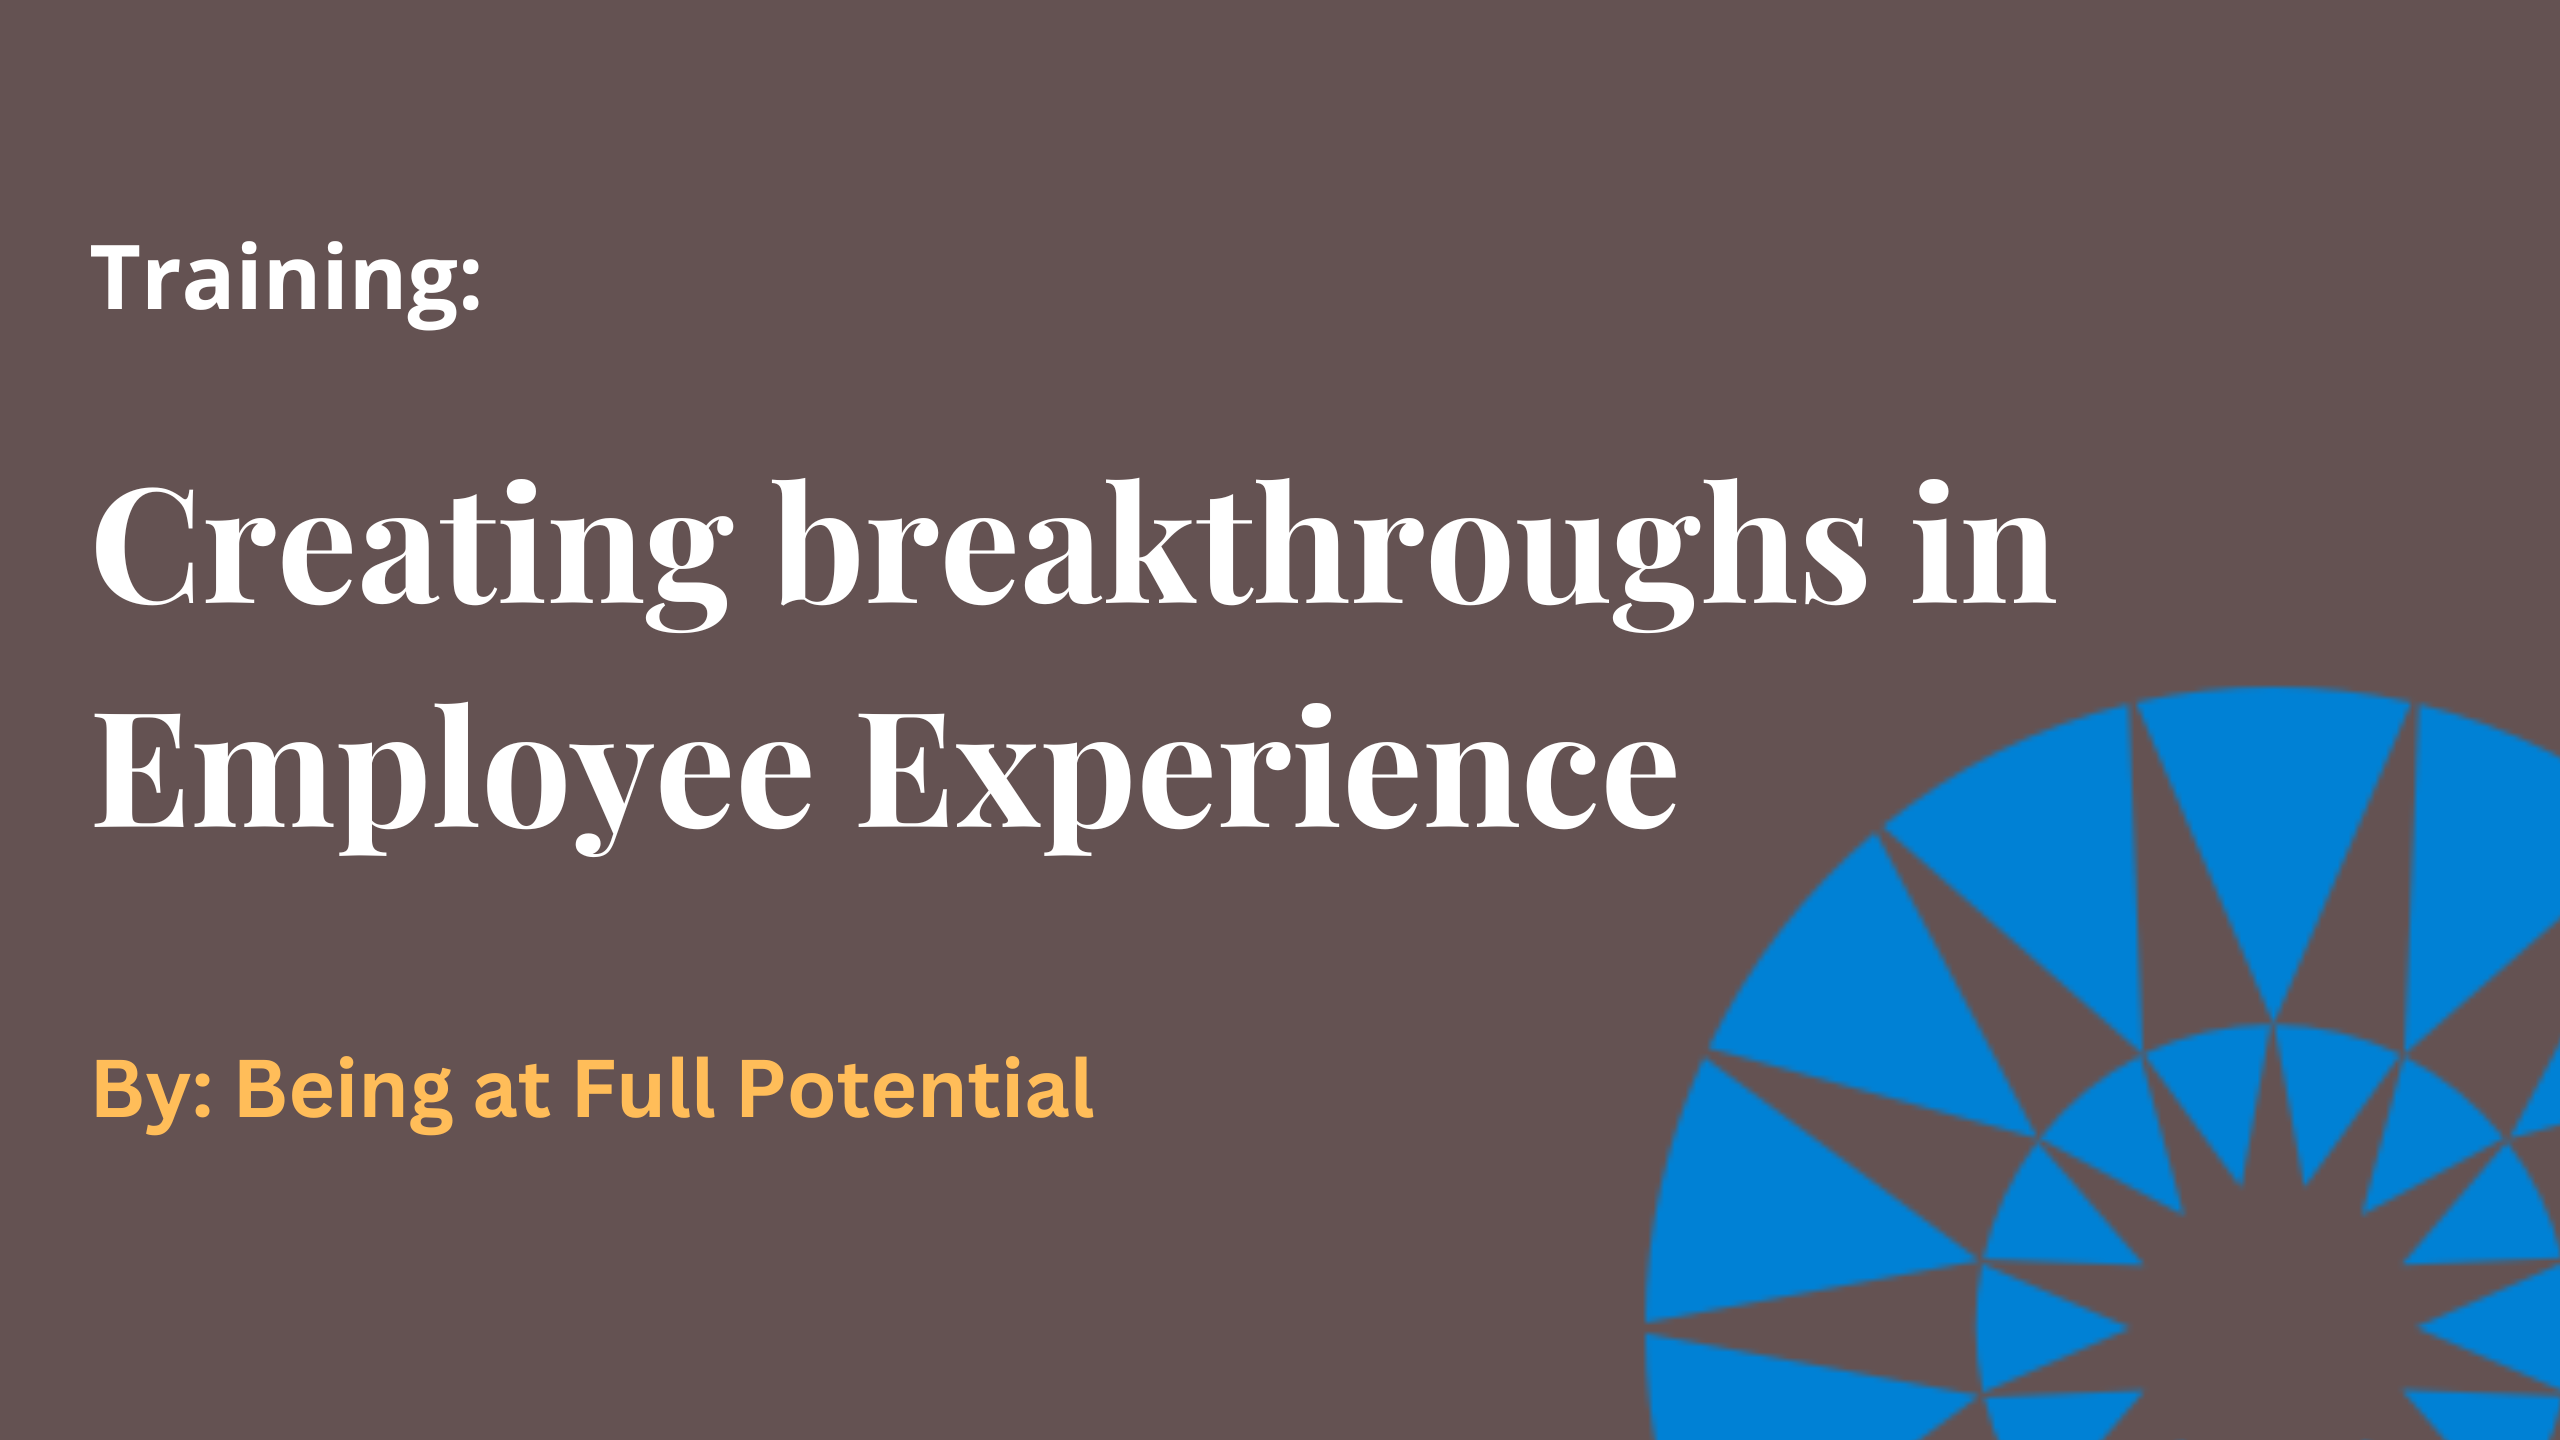 Training: Creating breakthroughs in Employee Experience